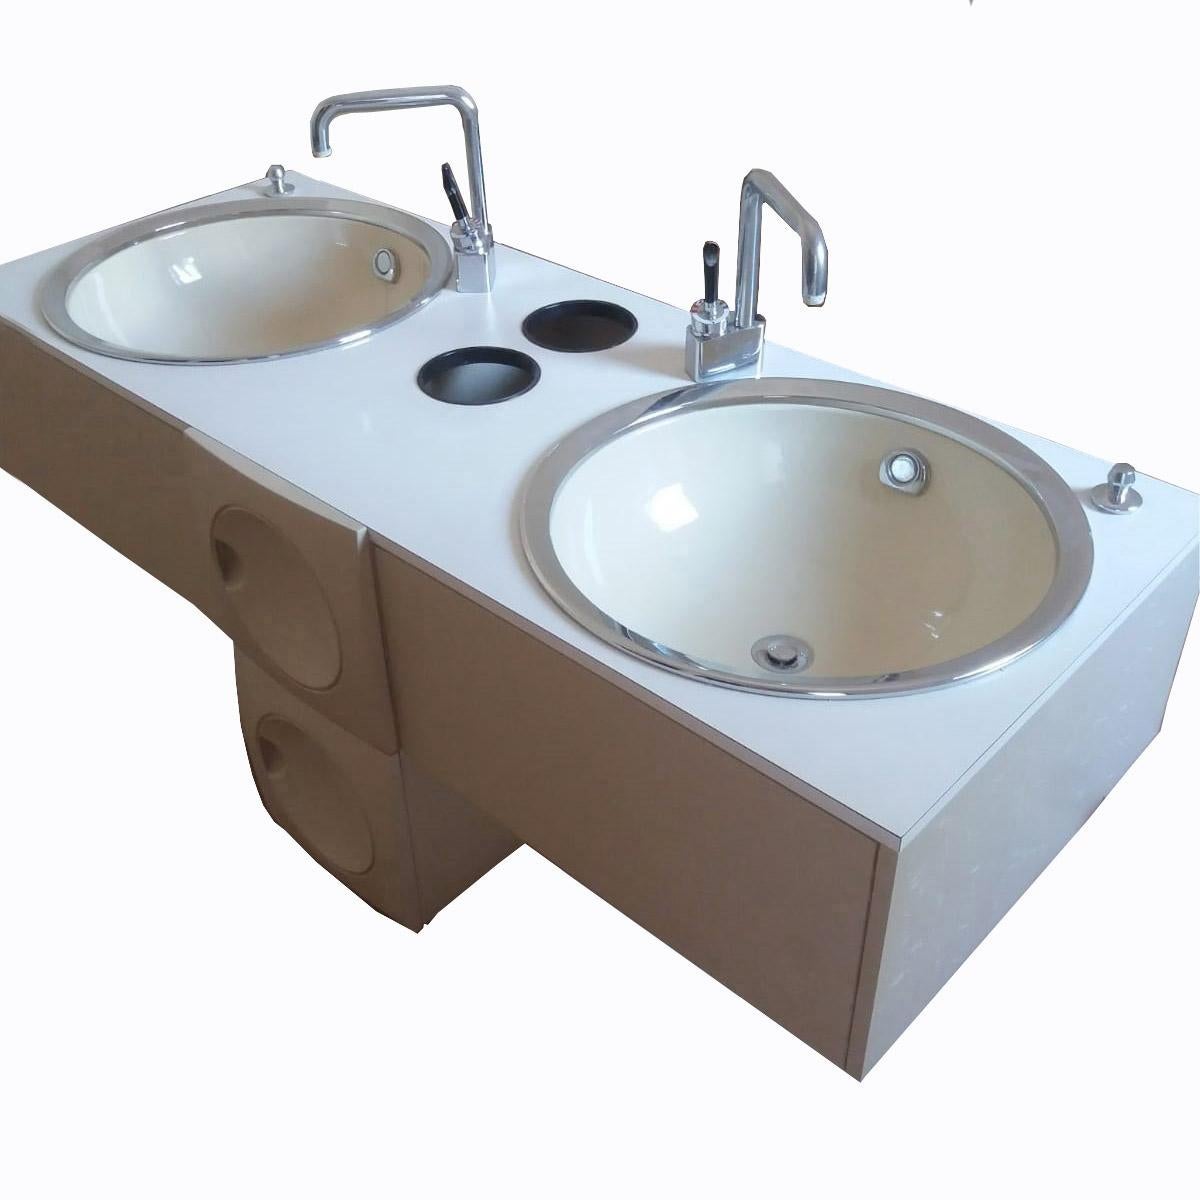 Original vintage bath interior furniture set dismantled from a showroom in late 1970s and stored for over 30 years.
Probably one of the few 1970s CRB sets existing in such a good condition.
Complete with period original faucets of high quality.
By